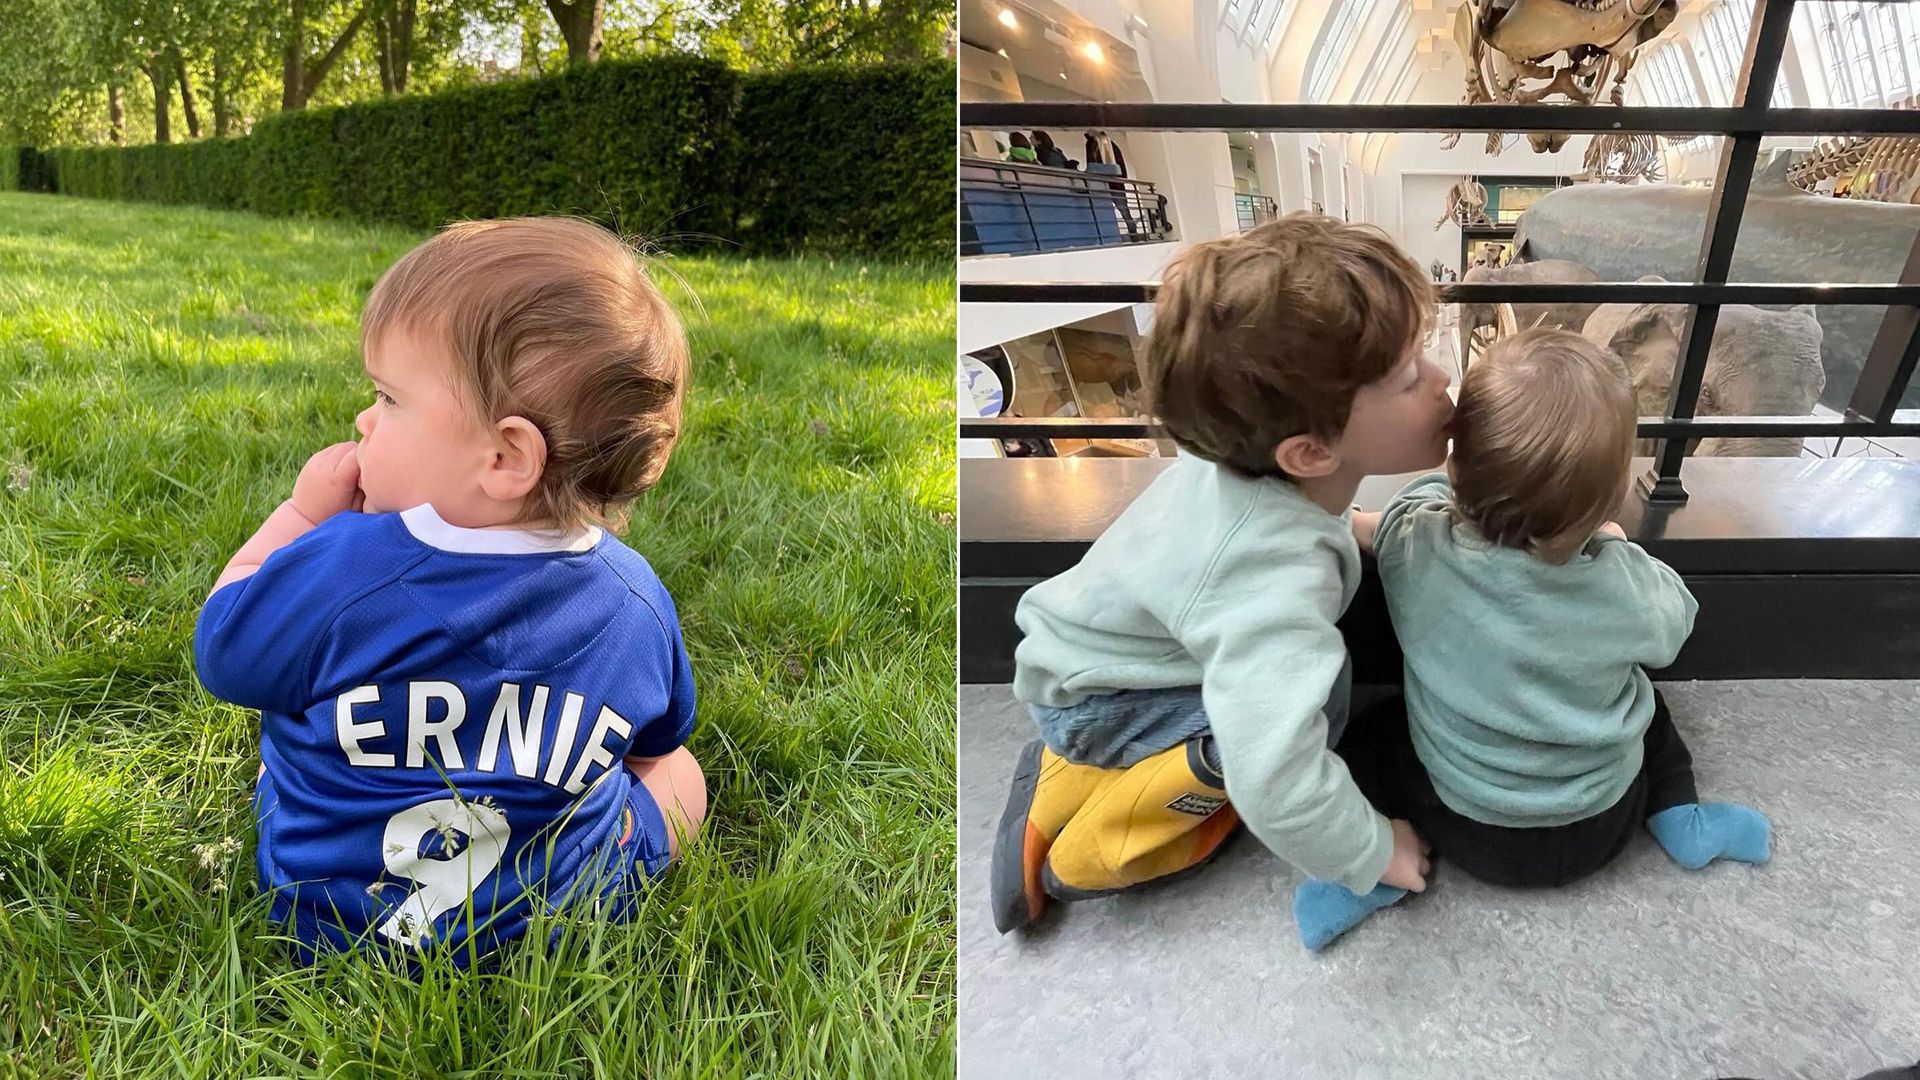 Princess Eugenie shares photos of rarely-seen sons August and Ernest to mark milestone